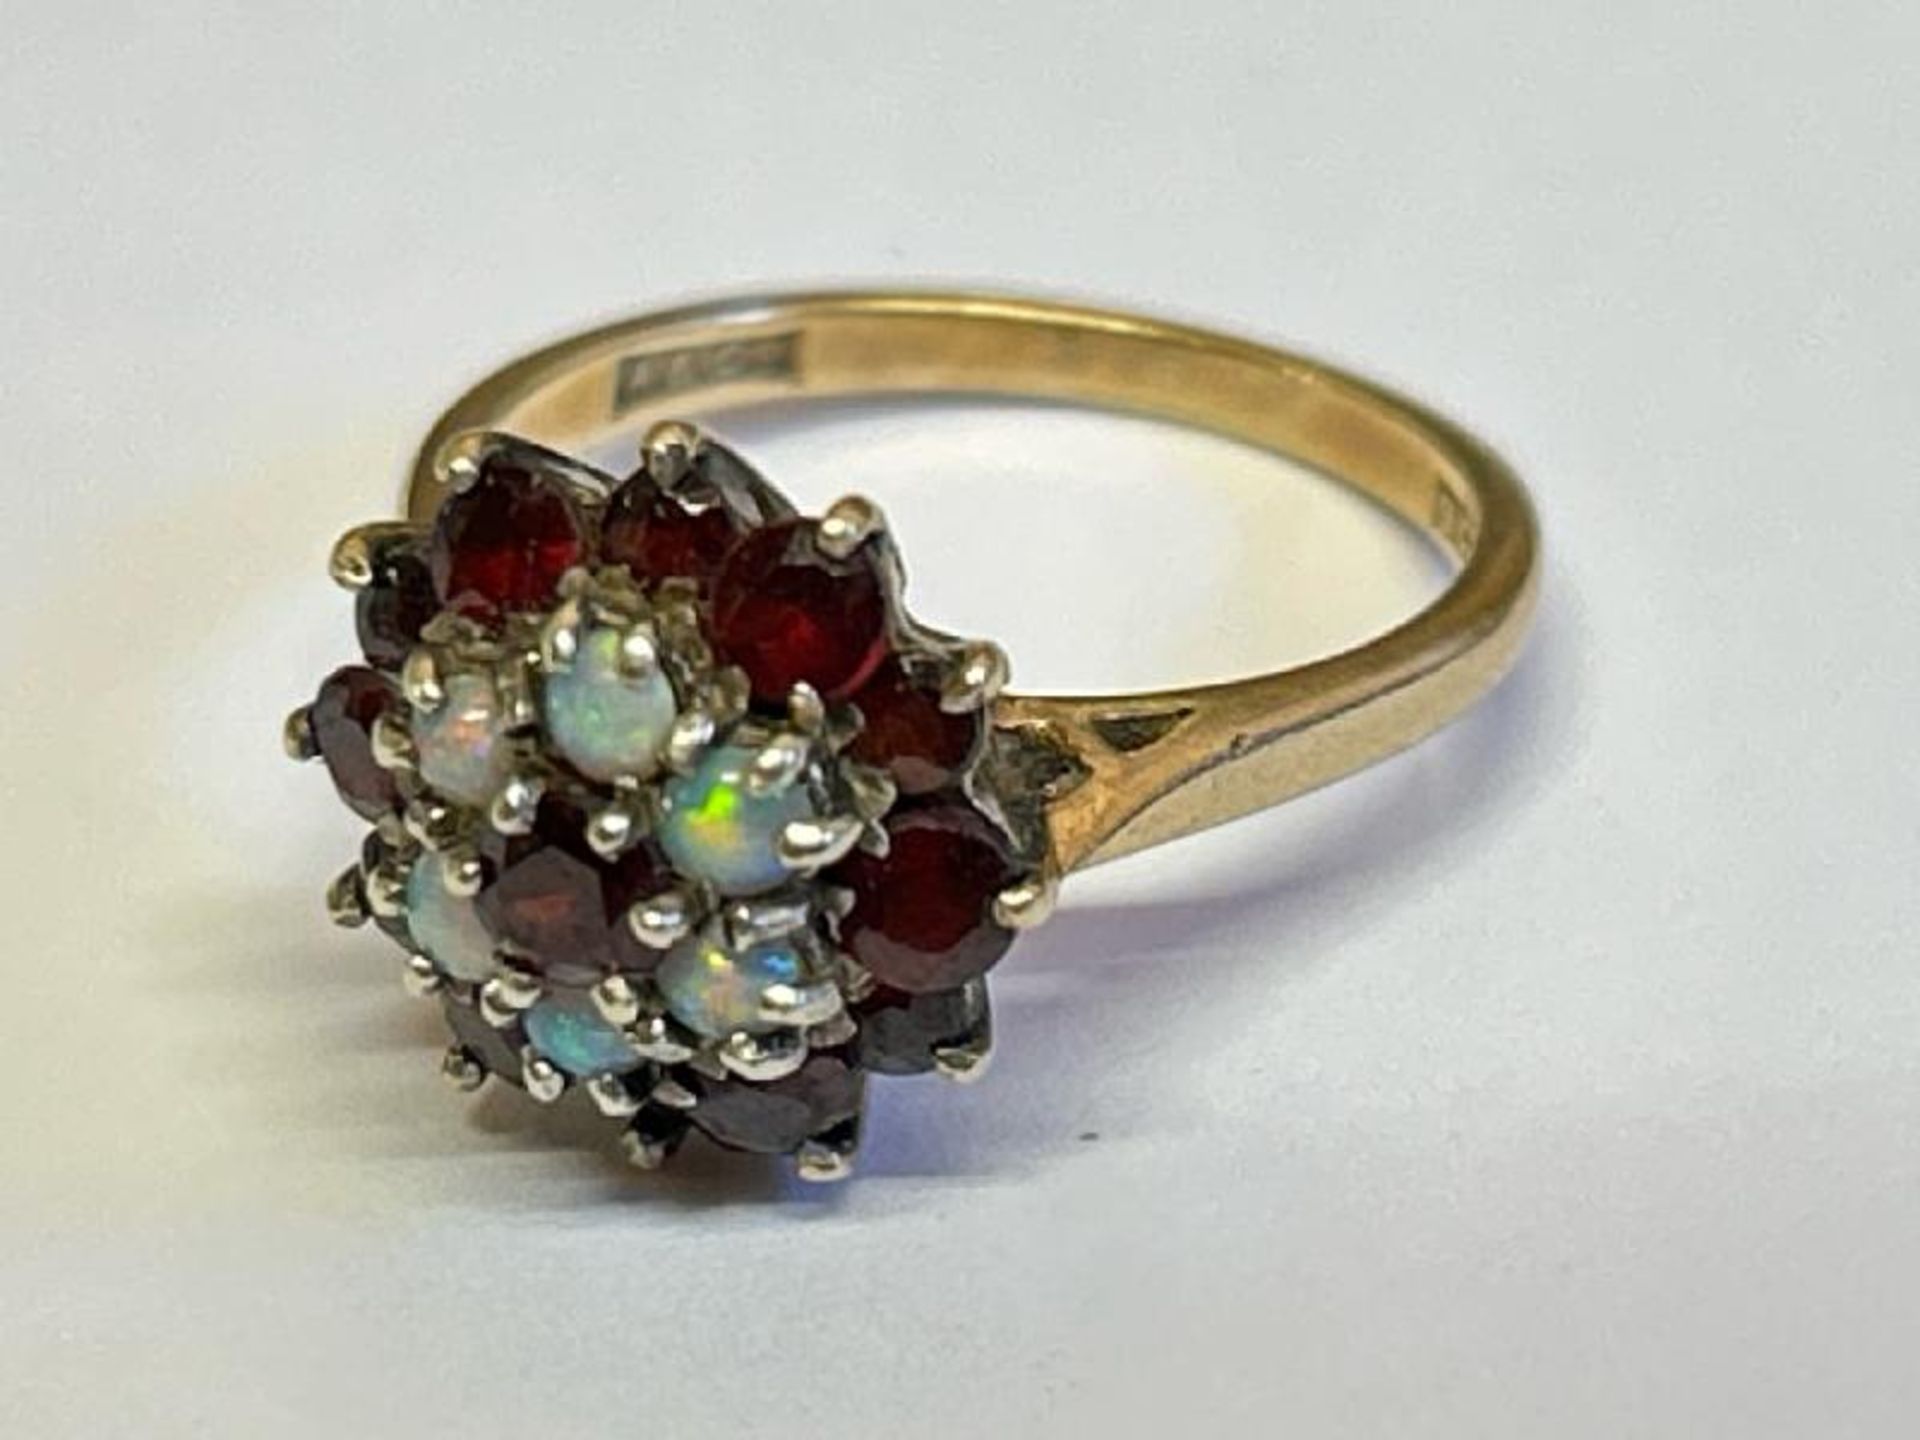 Opal and garnet cluster ring stamped 9ct gold. Ring size M, gross weight 3.89g / SF - Image 2 of 5